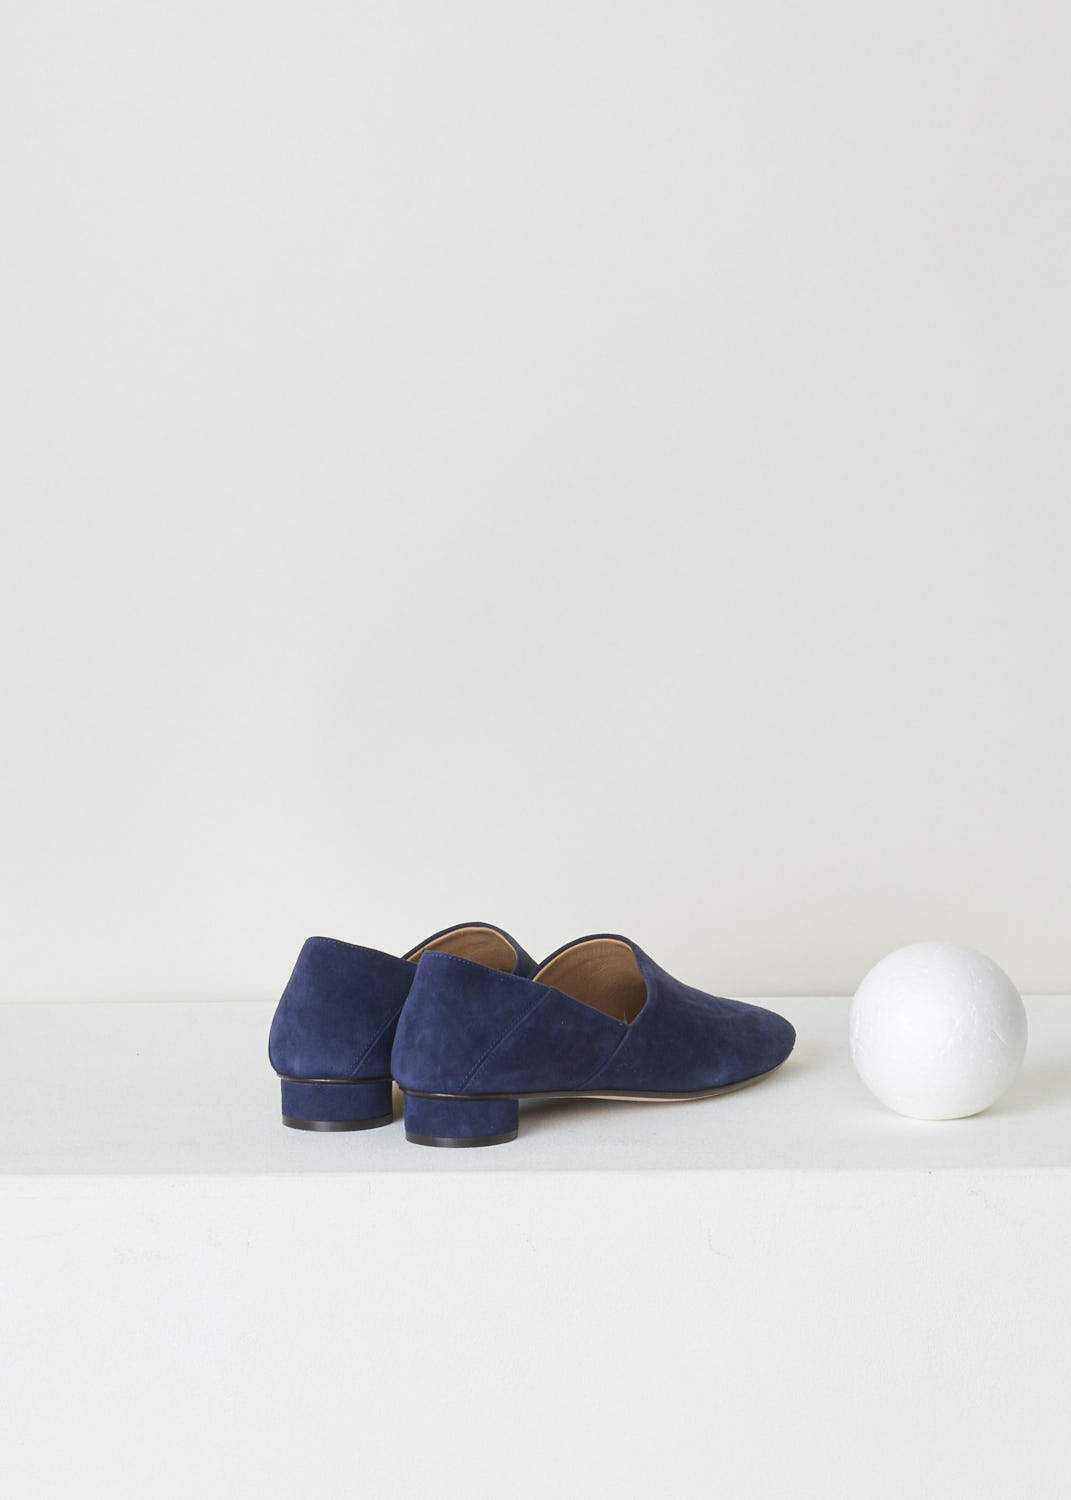 THE ROW, NAVY BLUE SUEDE SLIPPER, NOELLE_F1000_L25_NVY, Blue, Back, Minimalistic navy blue suede slipper. The slip-in model features a rounded toe vamp. The sober design is exactly what makes these shoes so beautiful.
